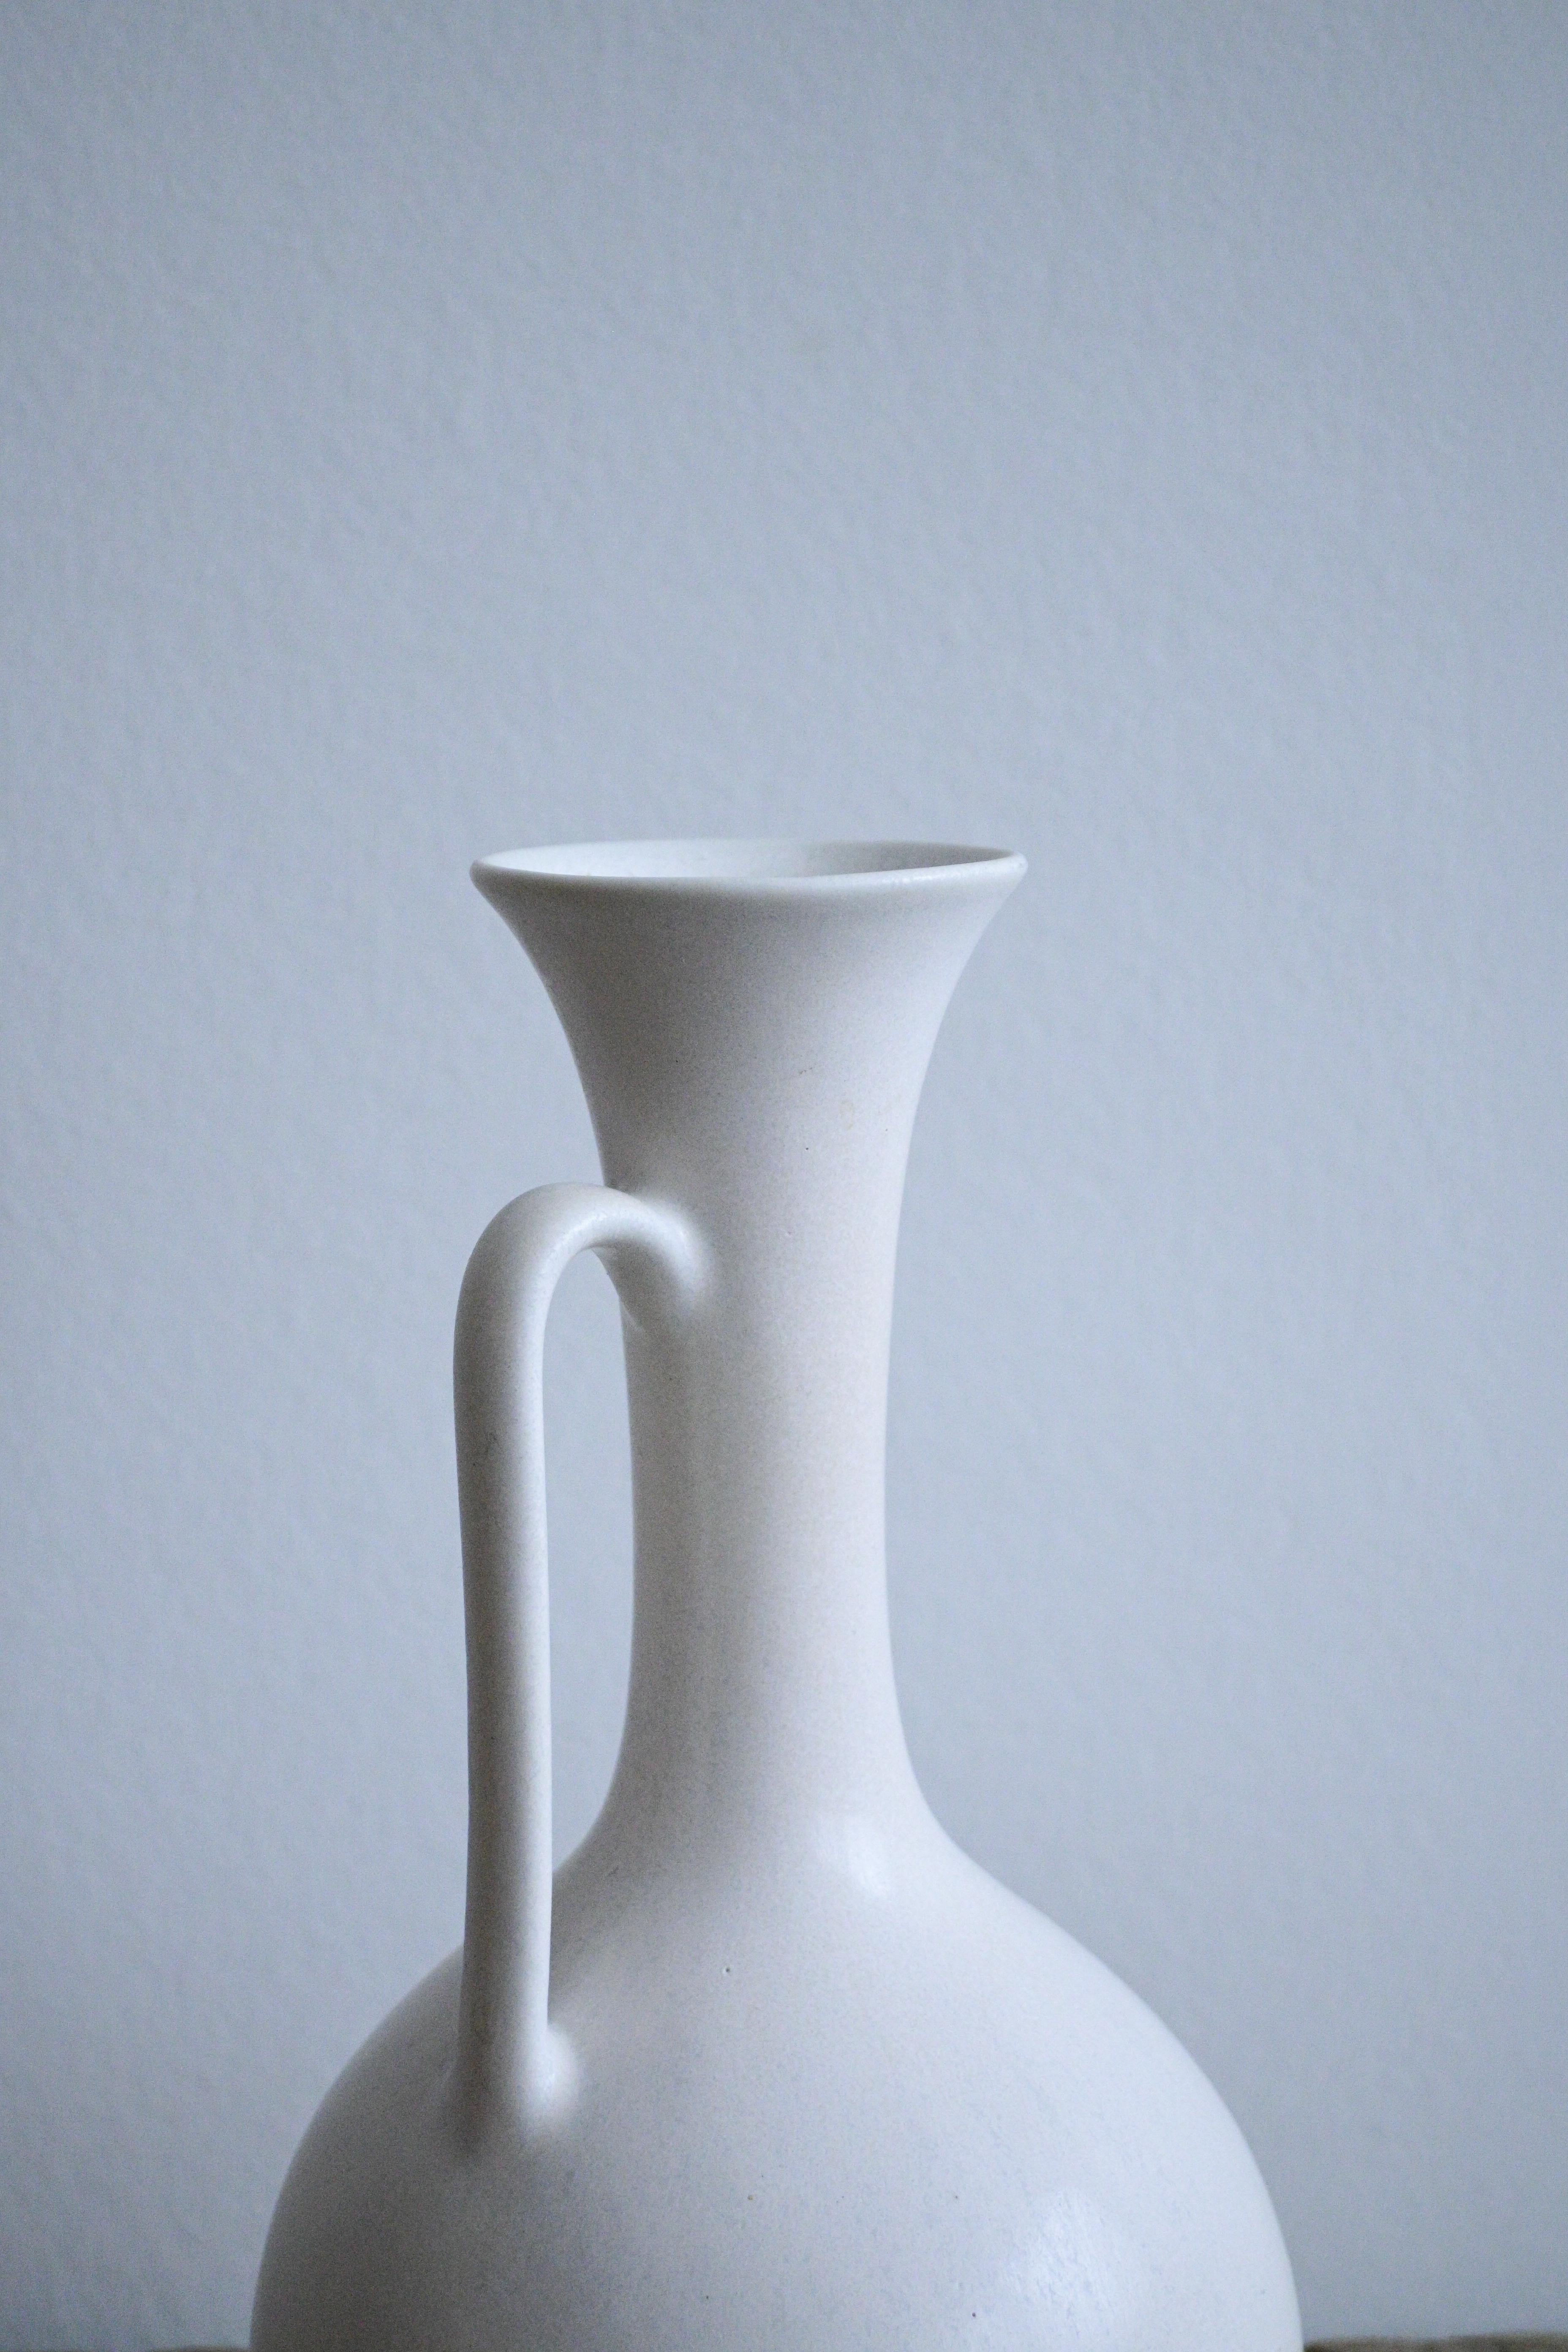 Rare Large Milk-White Vase by Gunnar Nylund for Rörstrand, Sweden, 1950s

The vase is marked as 1st quality and is in excellent condition.

Gunnar Nylund (1904-1997) was a renowned Swedish ceramic artist and designer known for his significant